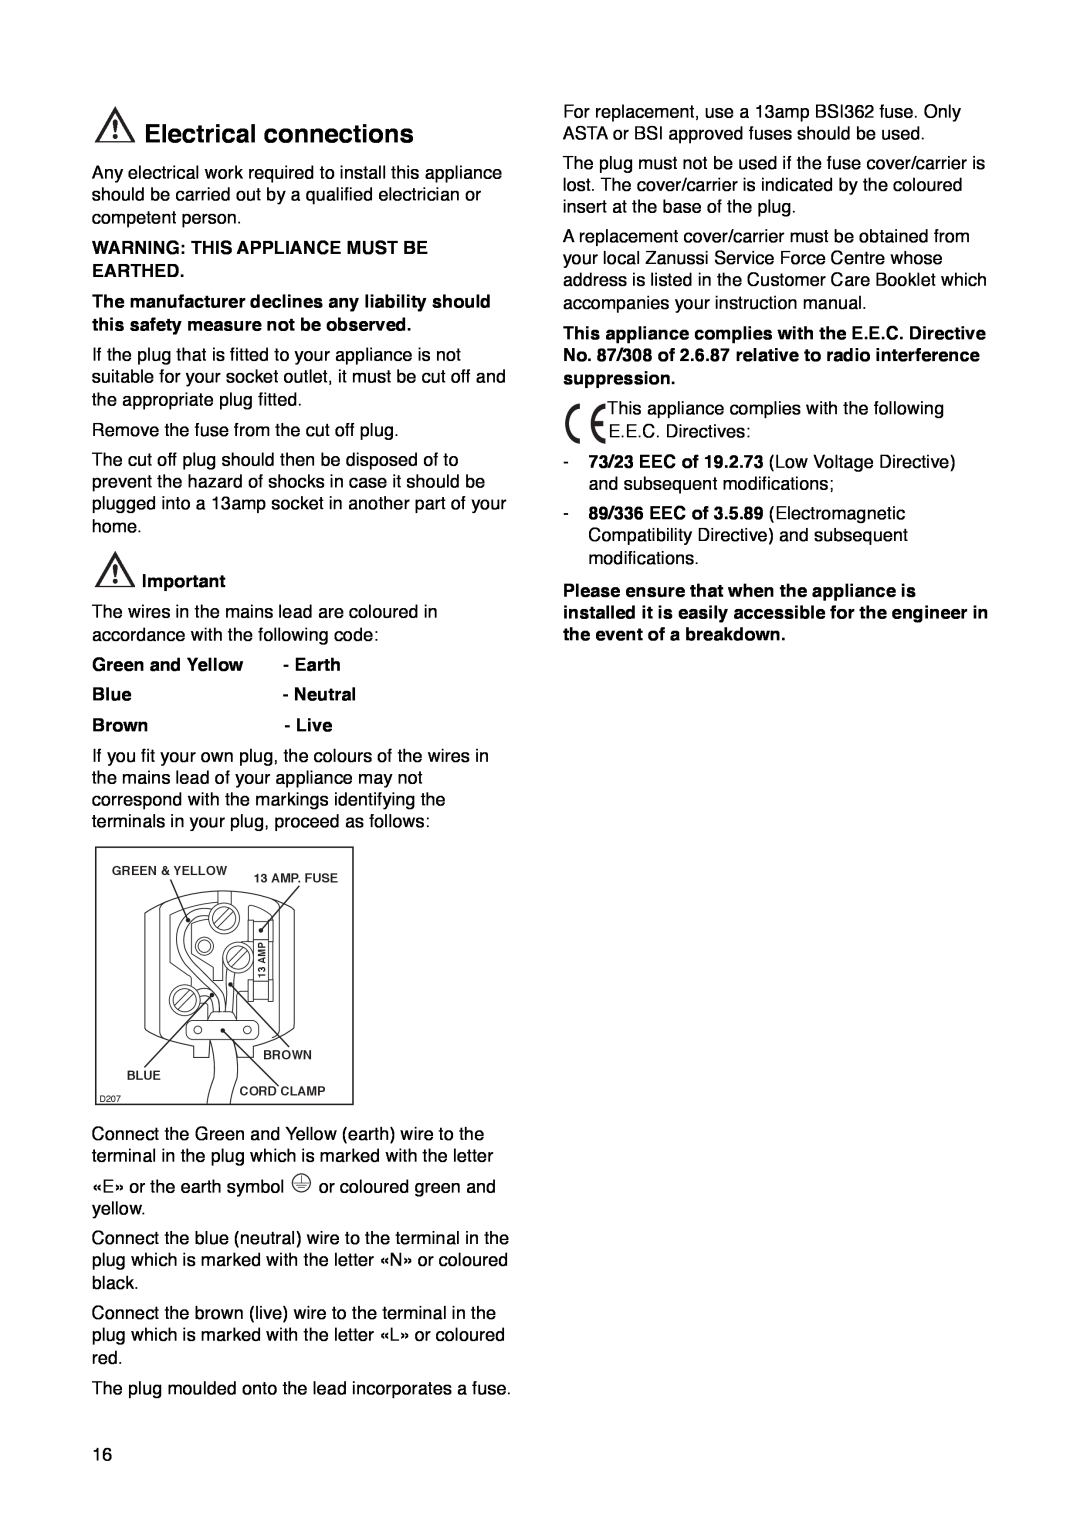 Zanussi ZI 720/8 FF manual Electrical connections, Warning This Appliance Must Be Earthed, Green and Yellow 